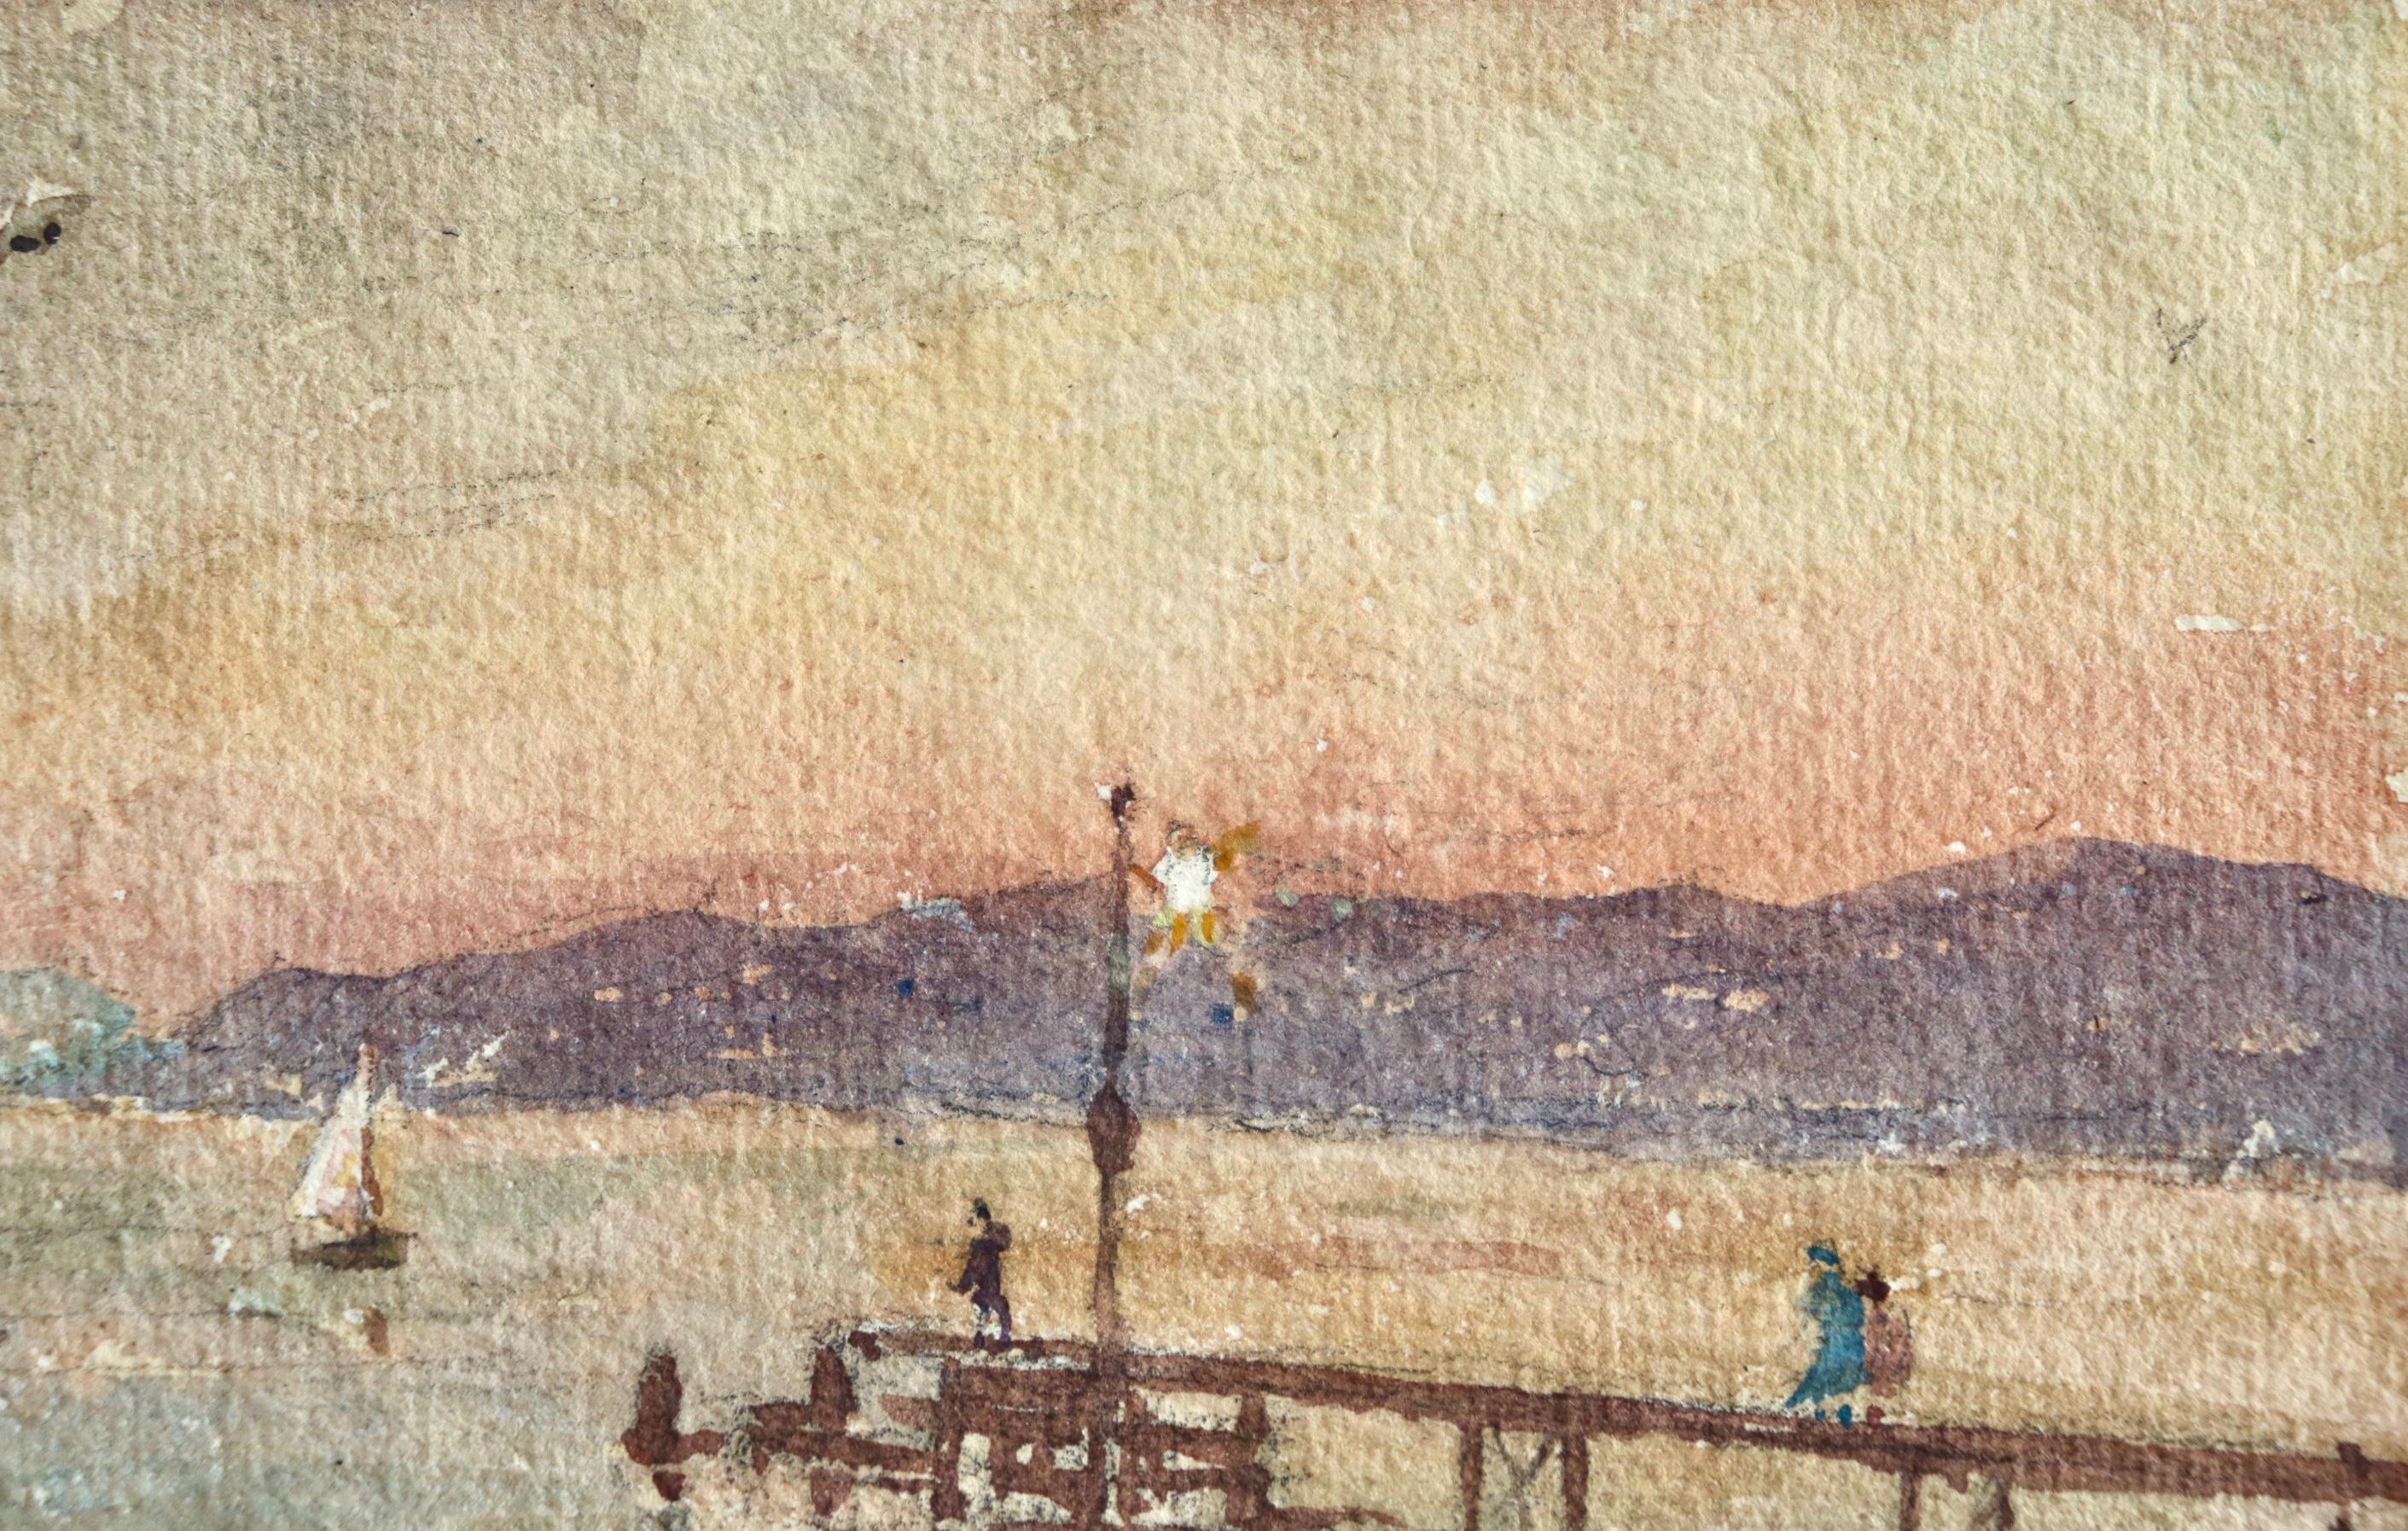 Watercolour on paper circa 1925 by French Impressionist painter Henri Duhem depicting people walking along a dock as a boat sails in the ocean and the last light glows pink behind the distance hills. Signed lower left. This piece is not currently